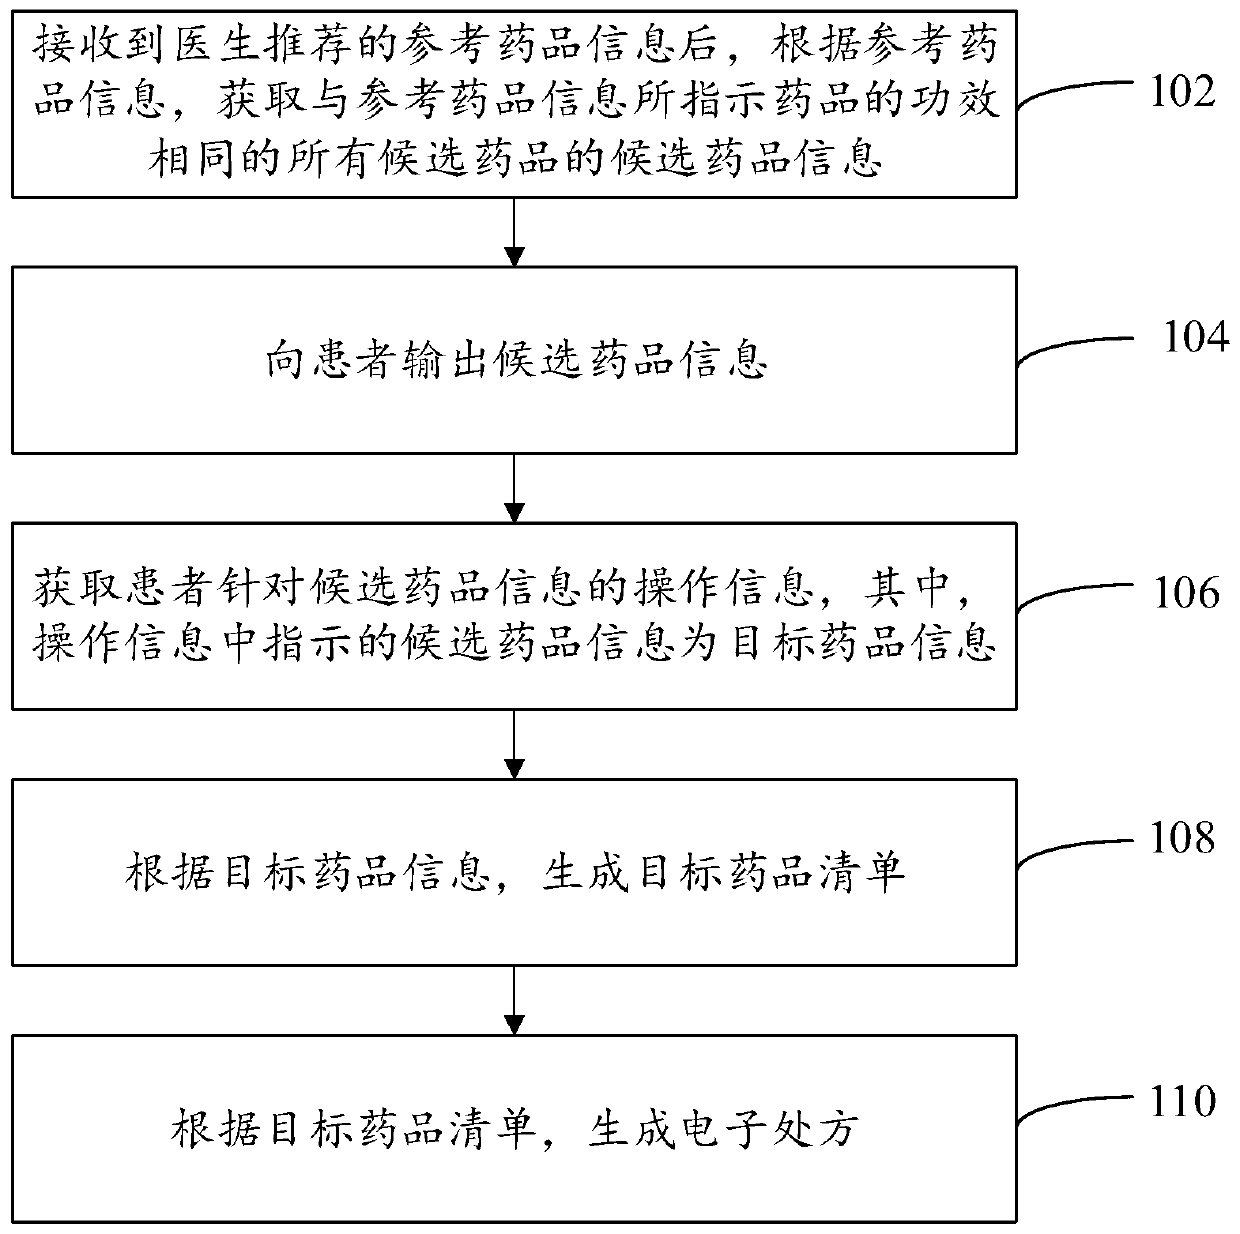 Electronic prescription generation method and device, computer device and readable storage medium